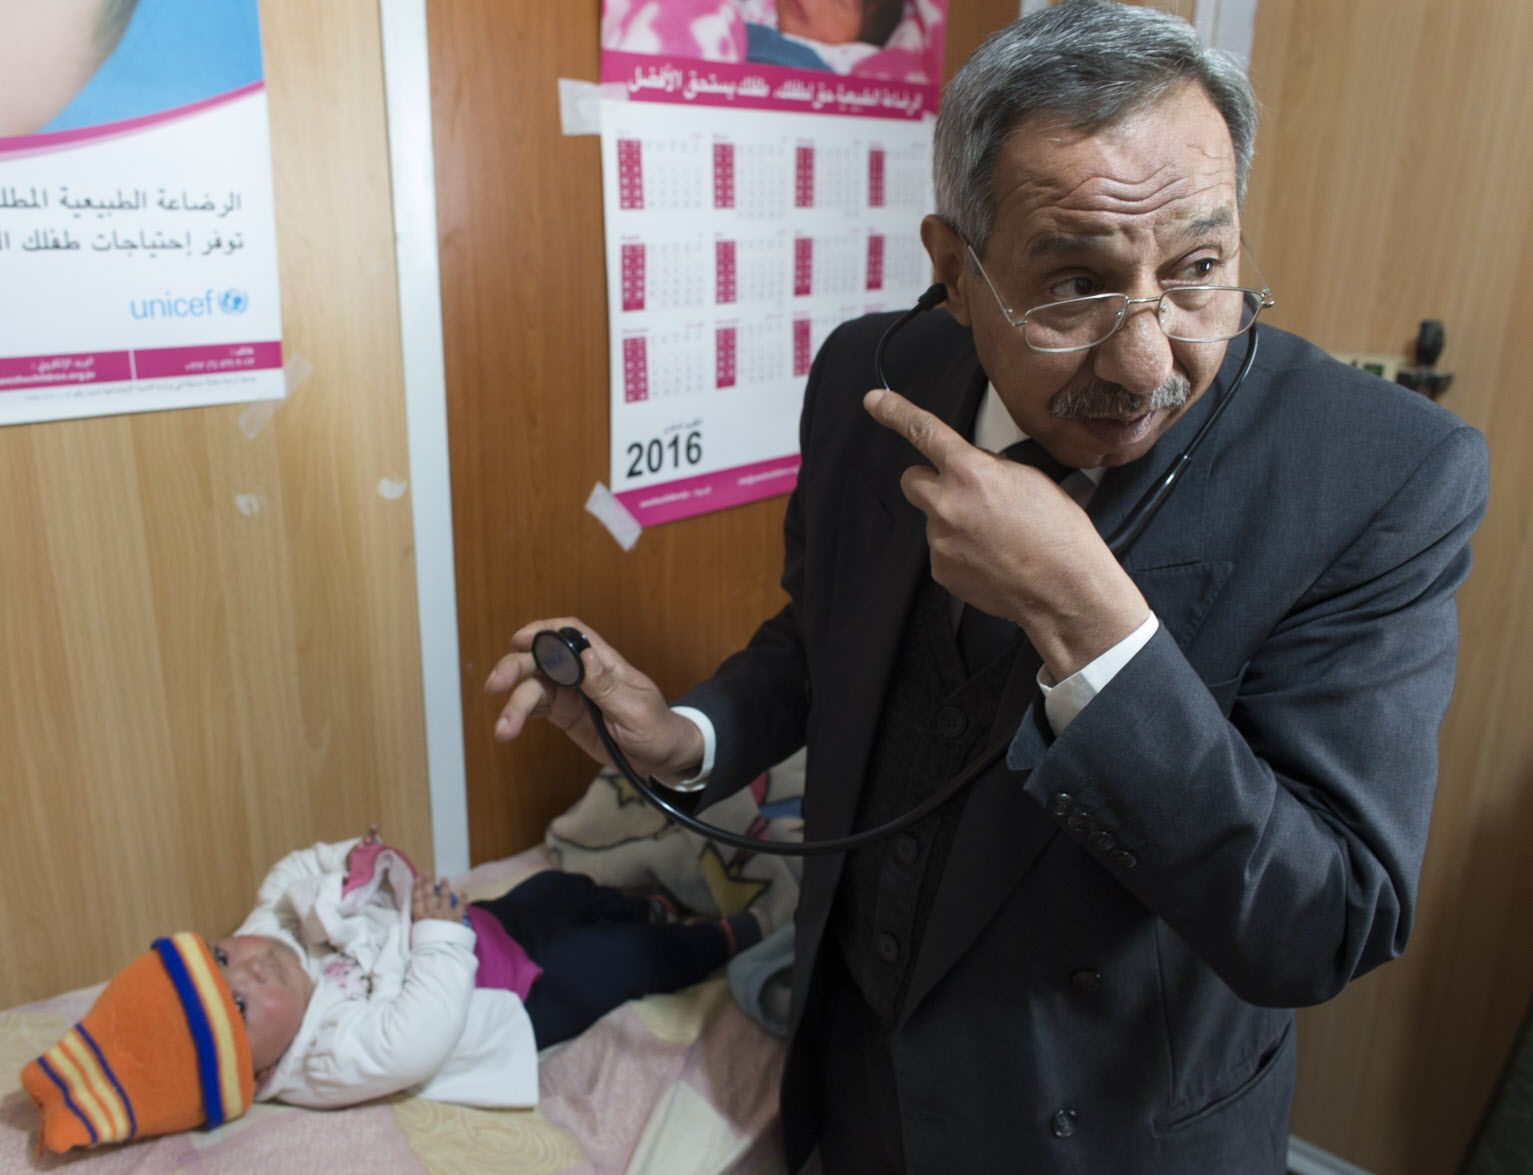 Clinic director and family practice physician Hussein Al Seibrani examines an infant. Seibrani is also a refugee and was a torture victim in Syria. Image by Mark Hoffman. Jordan, 2016.